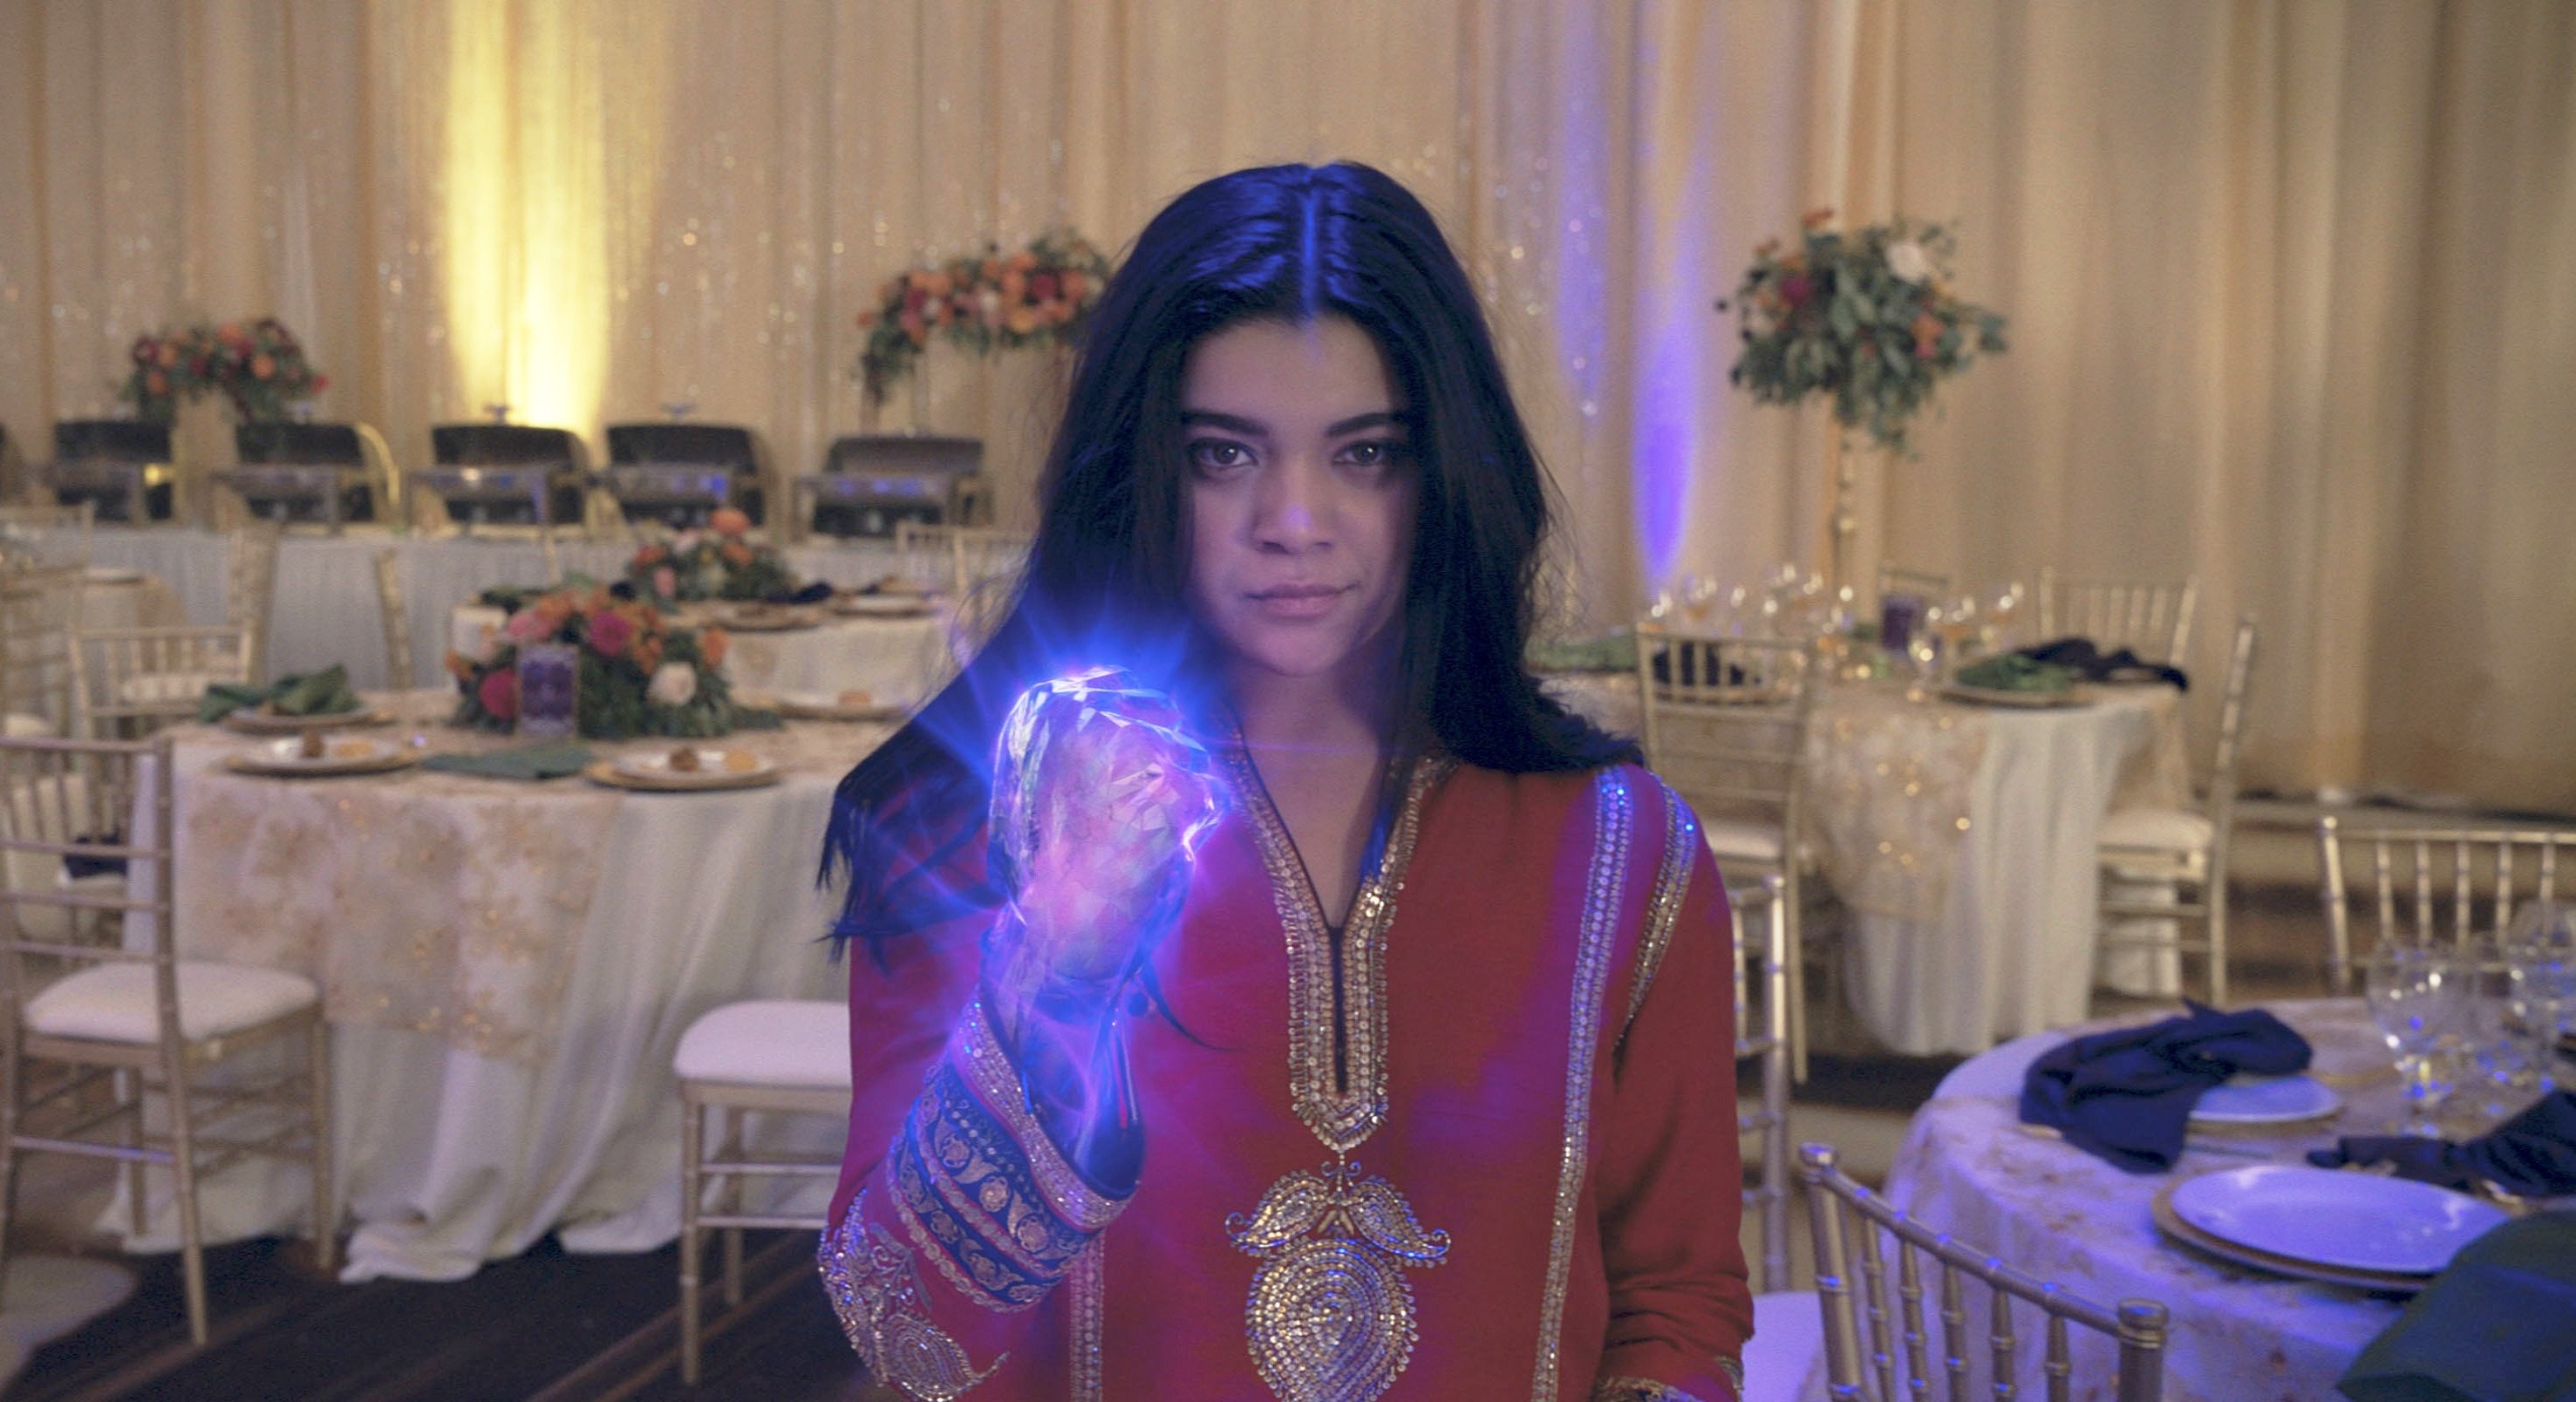 This image released by Disney shows Iman Vellani in a scene from the series 